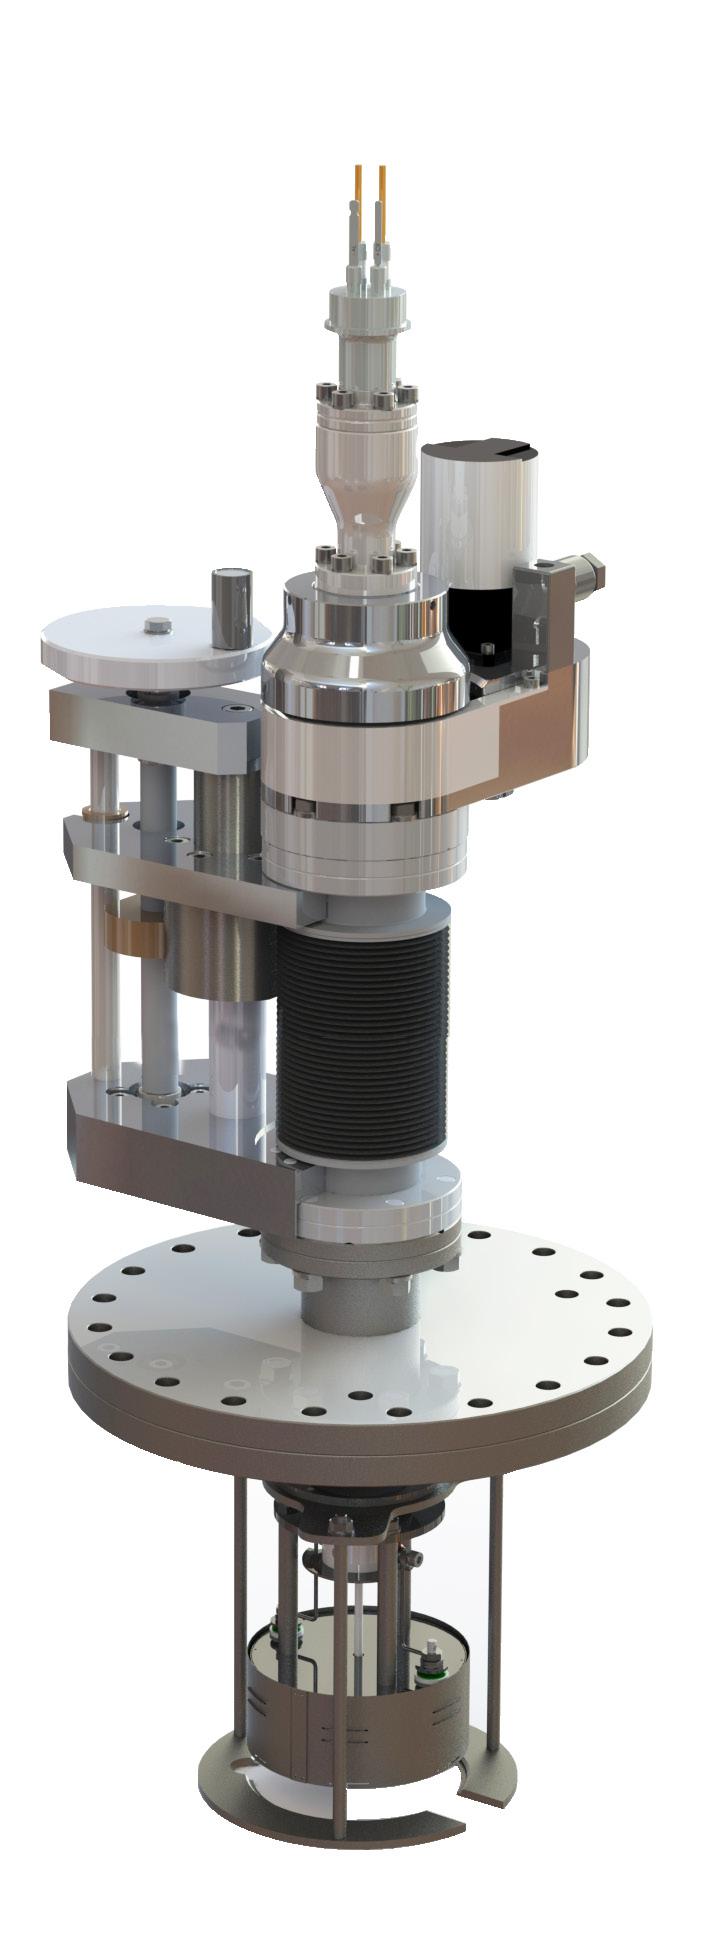 Rotary Preparation Stages Source EPS Series Shutters Substrate parallel to plane of mounting flange Cost-effective in-line preparation stages for 2" & 4" substrate preparation offering high